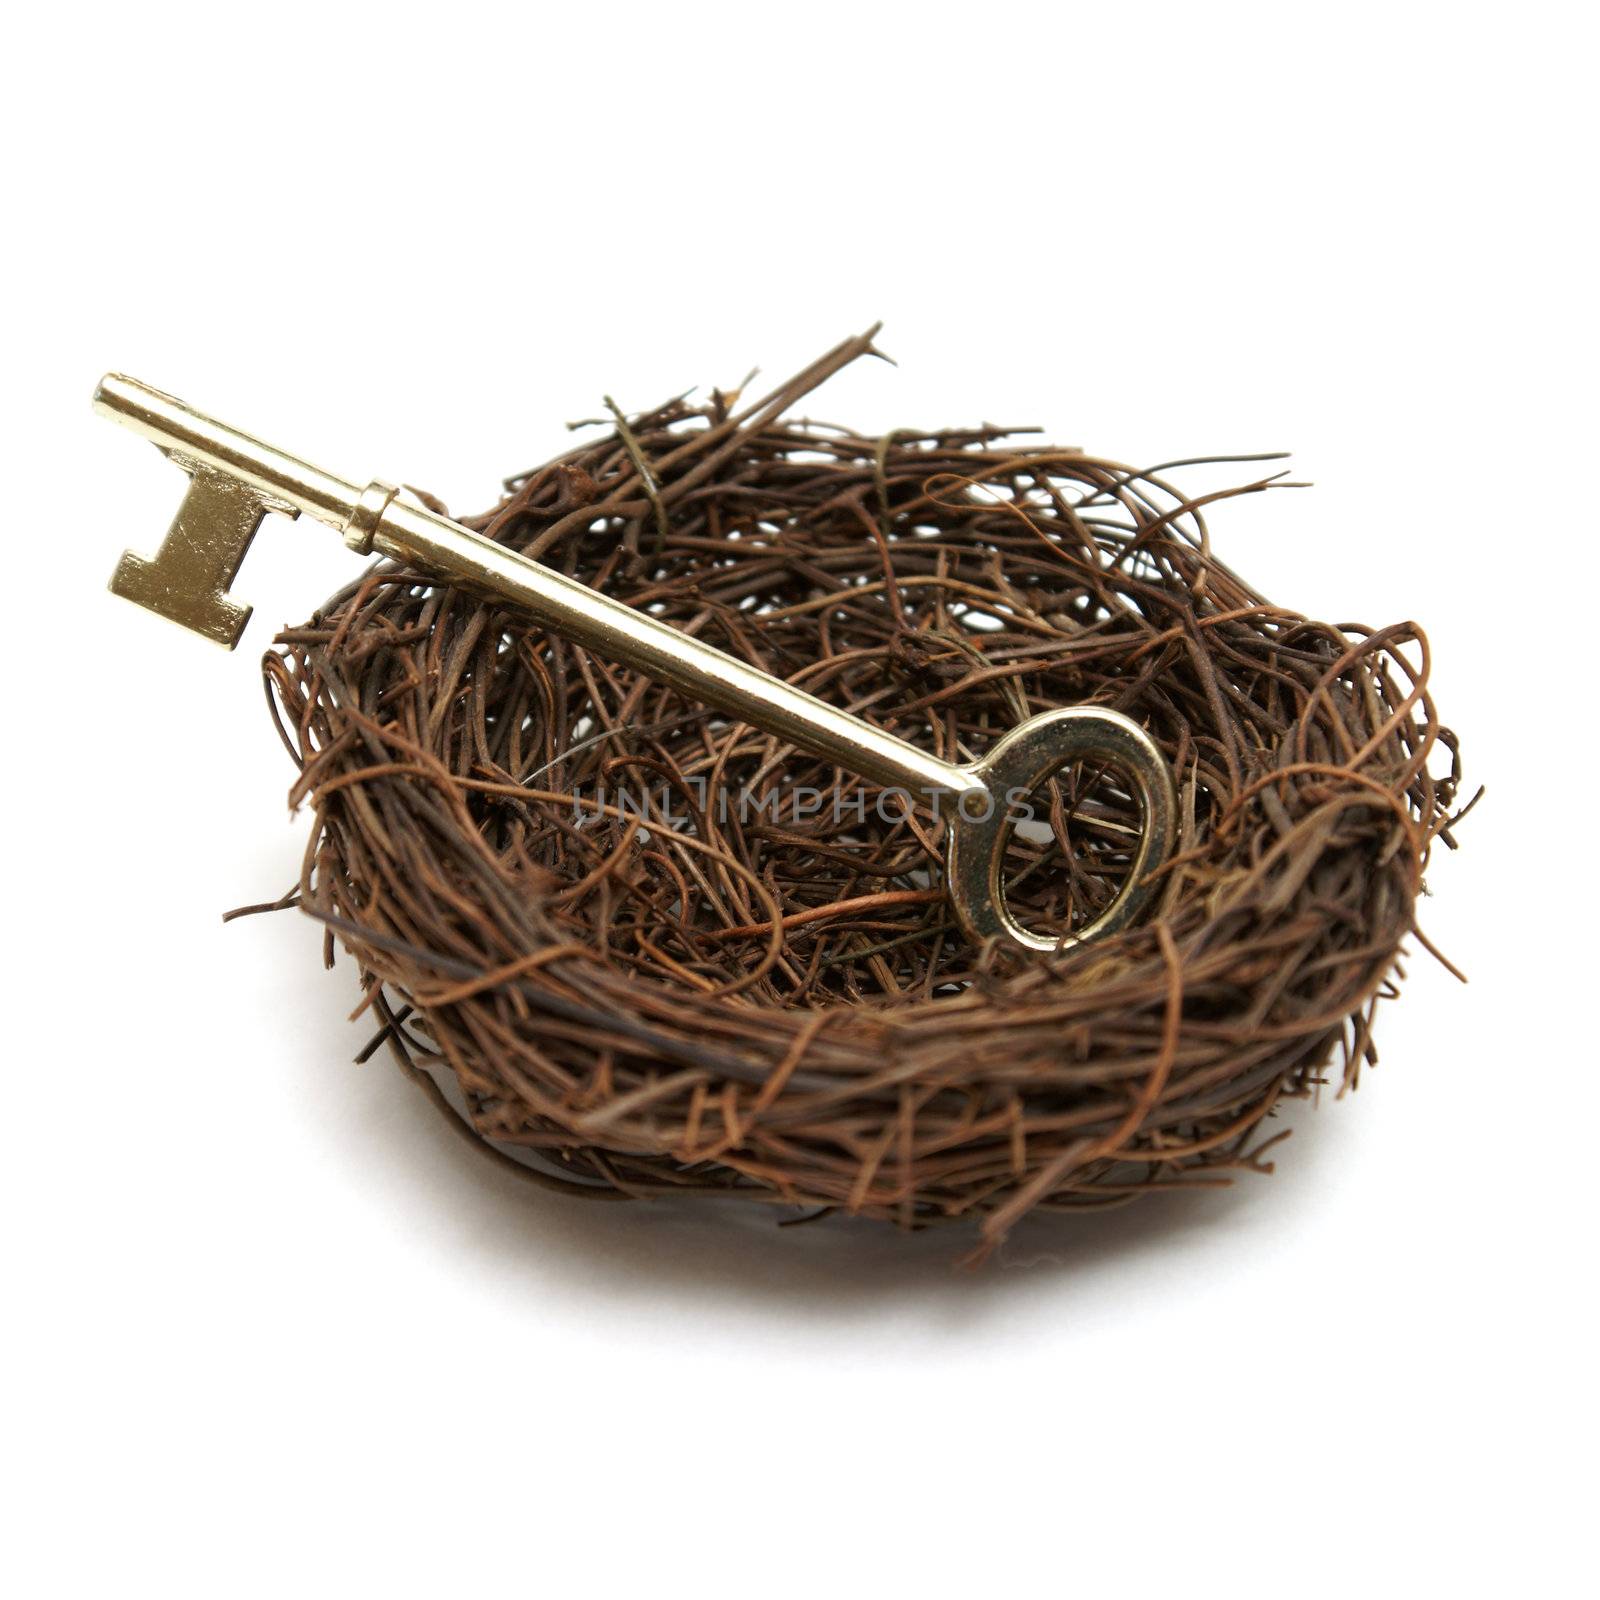 A brass skeleton key lays in a nest for several different concepts.